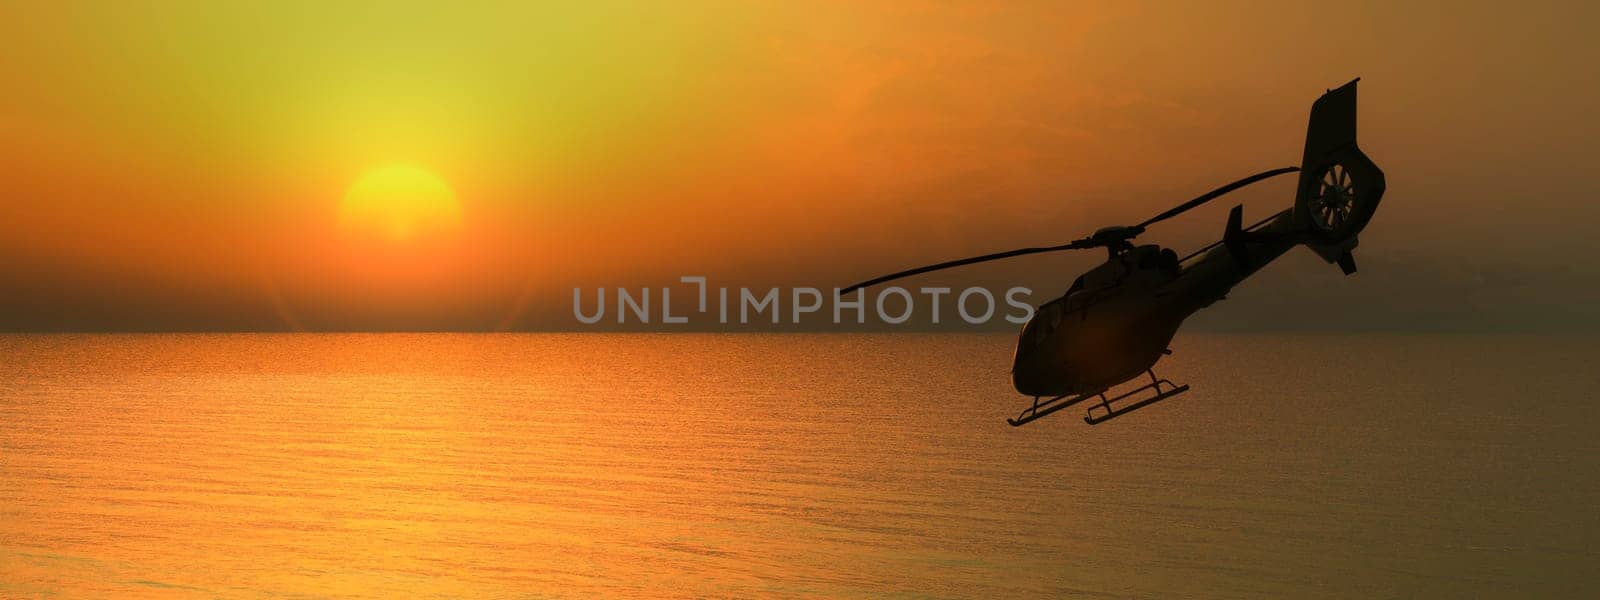 A 3D-rendered helicopter silhouette against a stunning ocean sunset, creating a scene of peaceful motion